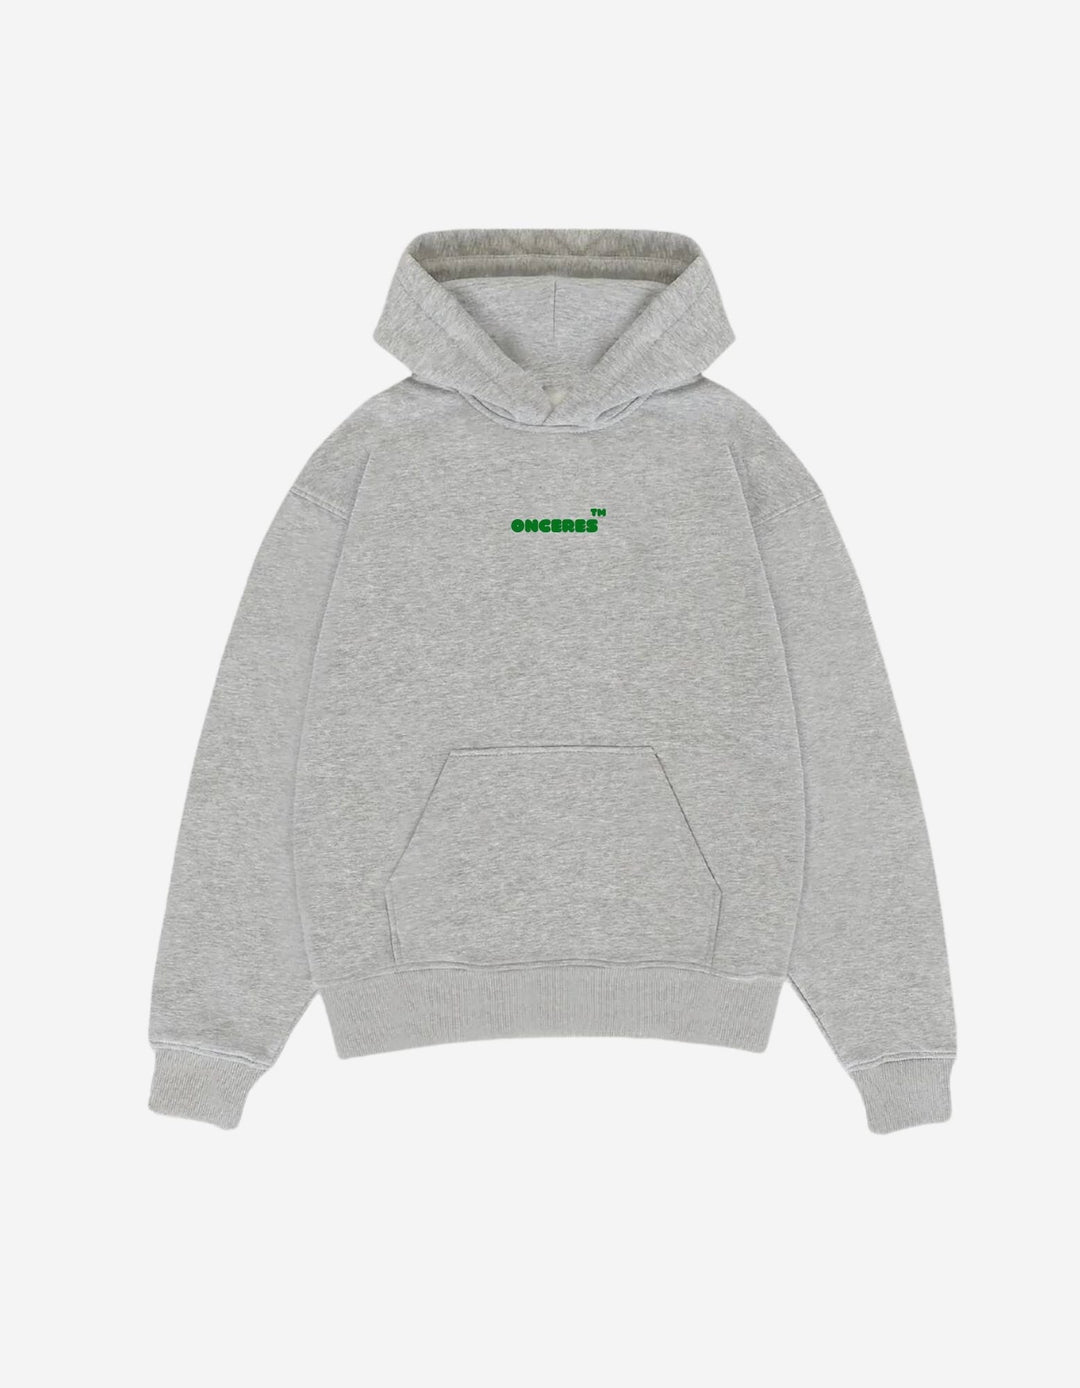 LIMITED HEAVY HOODIE - Just kiss me, we can talk later oversized hoodie